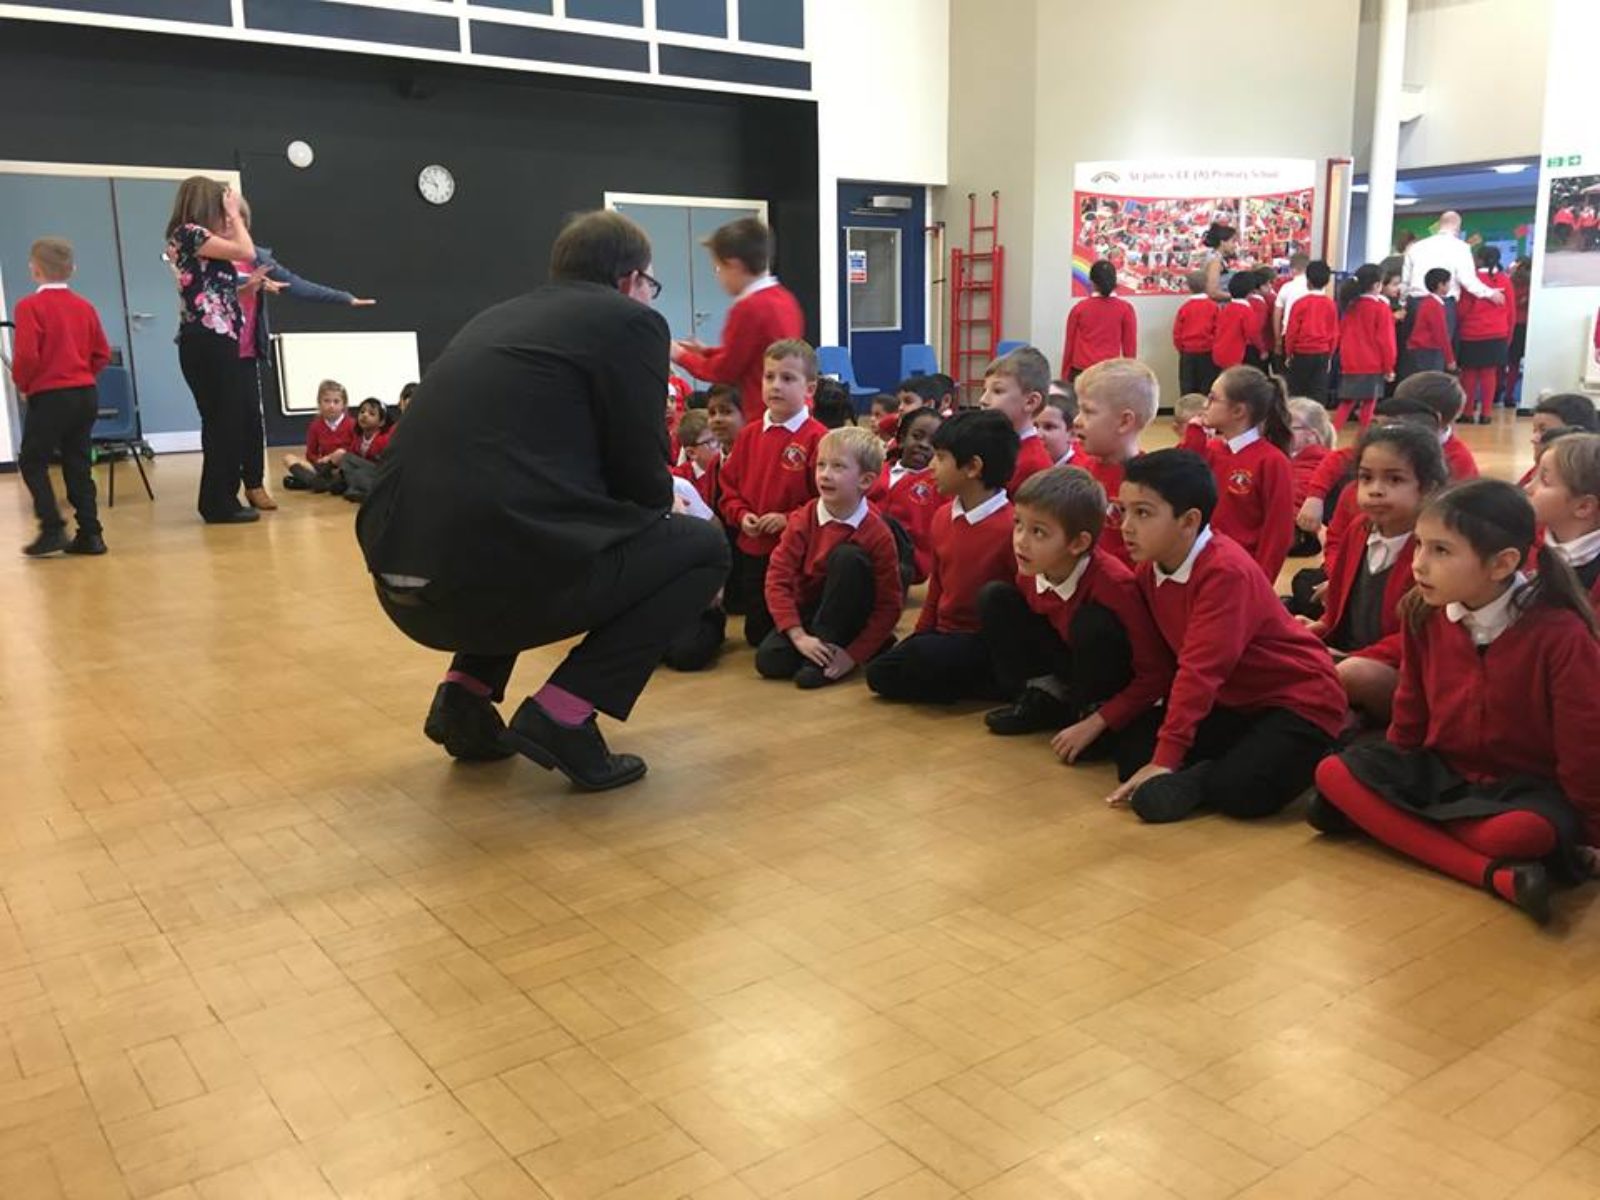 Gareth meeting the children at St Johns CE(A)  Primary School in Trent Vale.